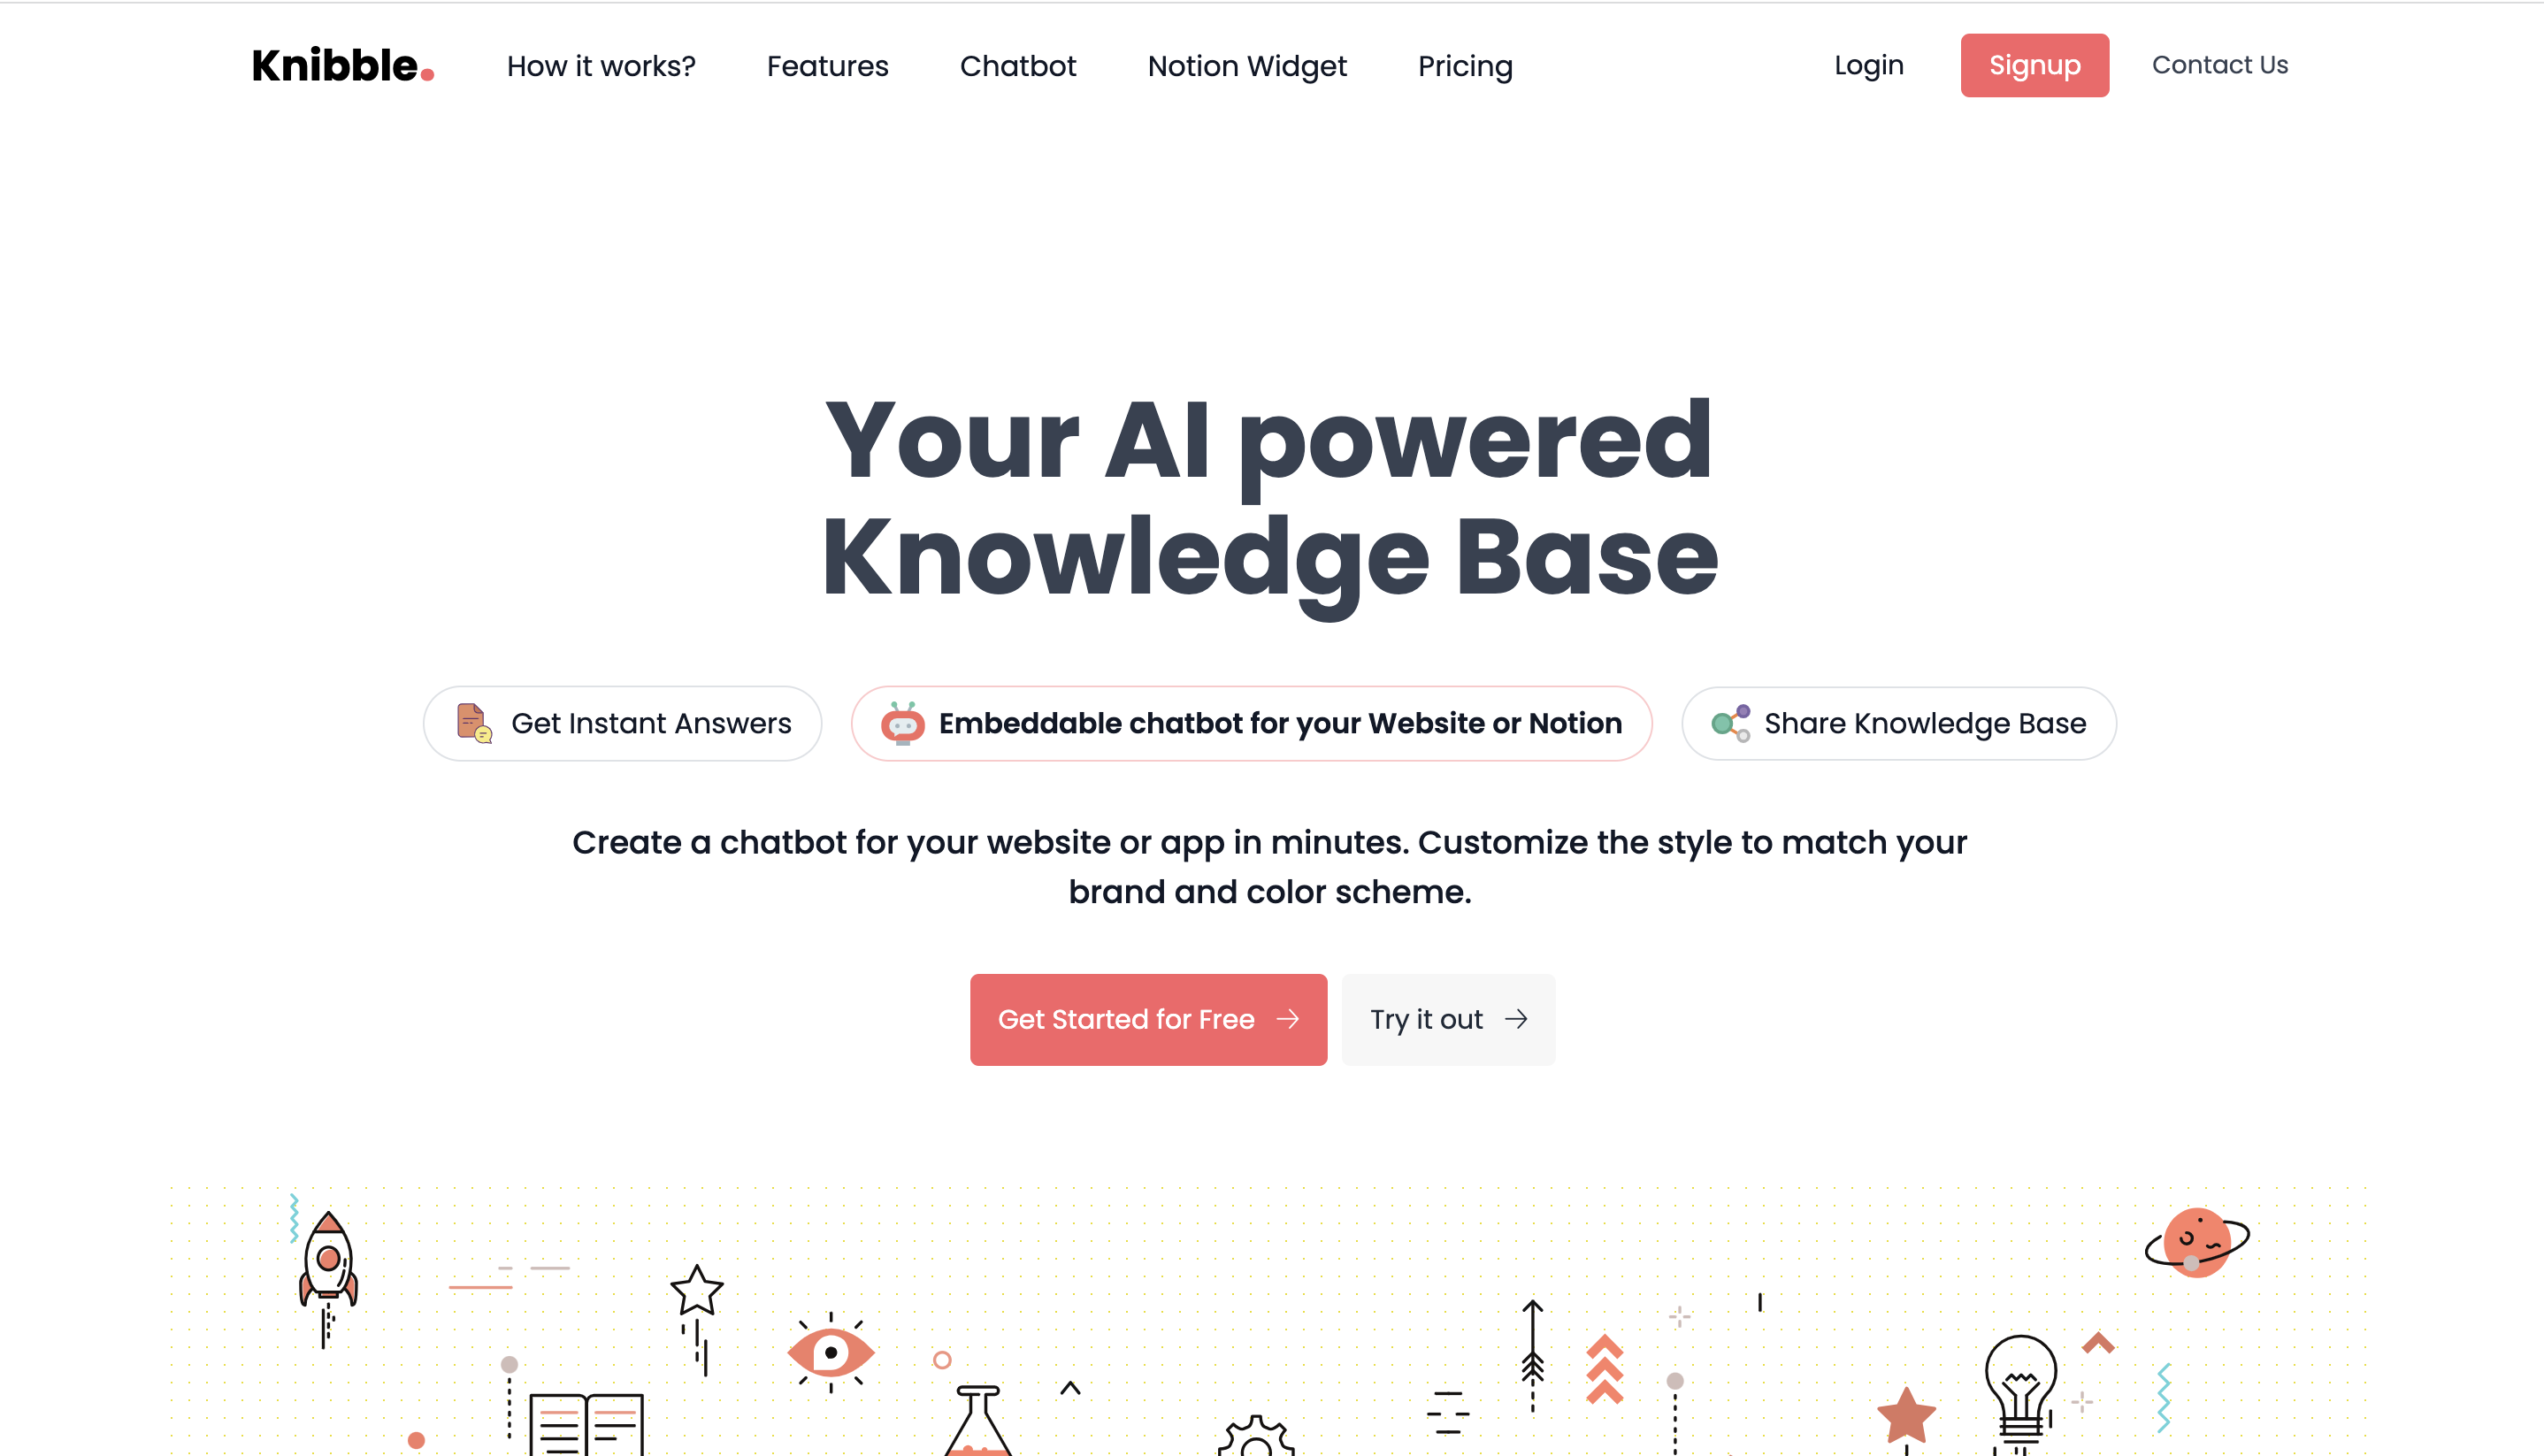 Knibble.ai - A tool to create knowledge base customizable chatbots and document summarization